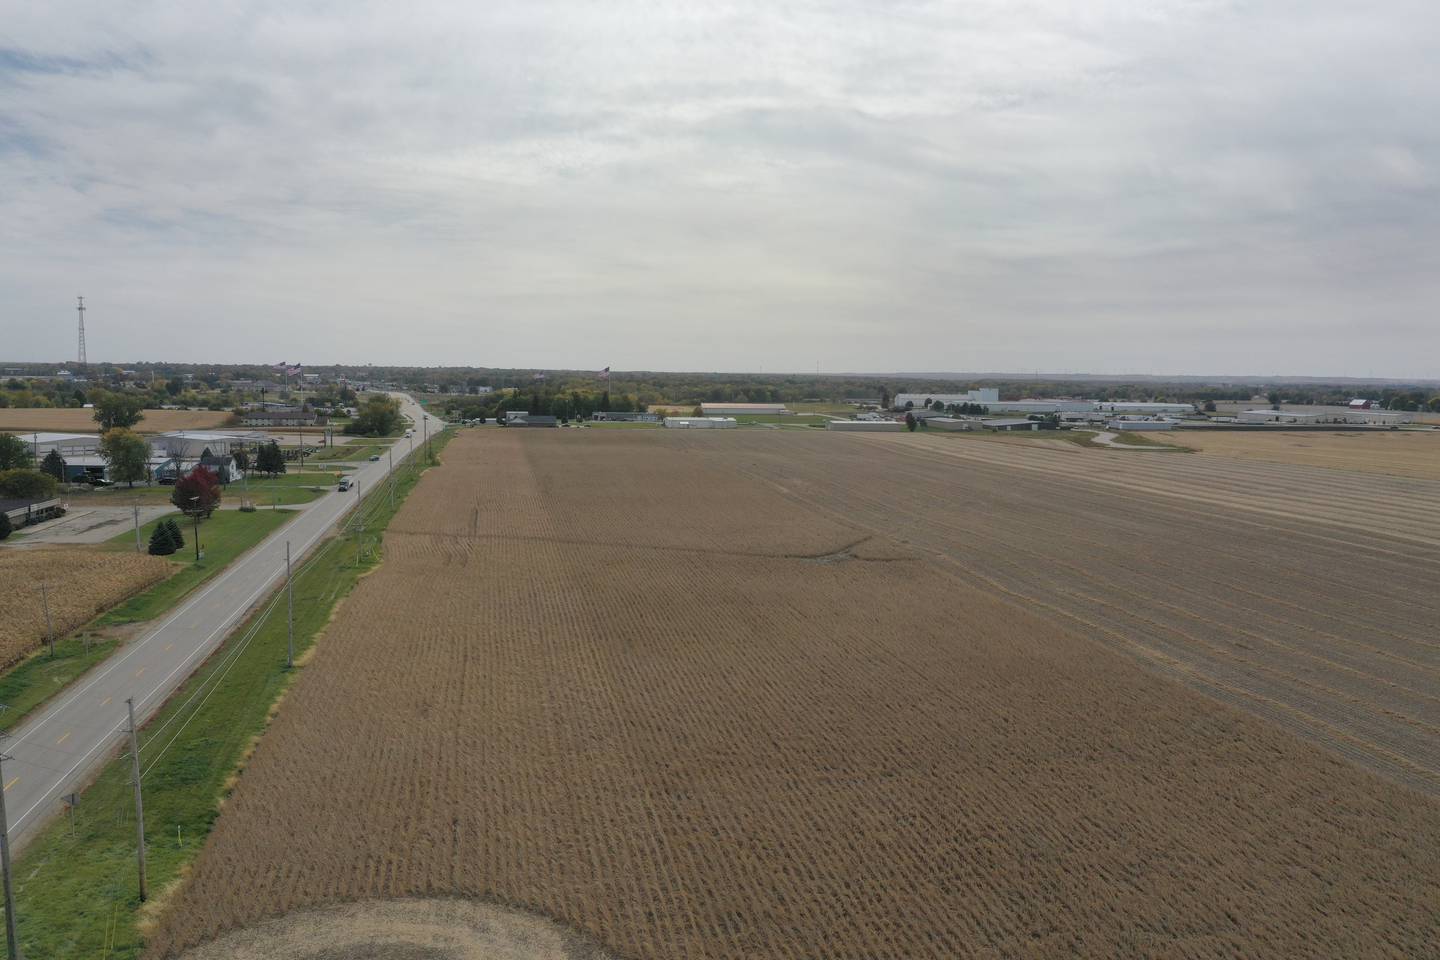 This parcel is part of 134 acres owned by the City of Princeton and will be the new home of Ollie's Bargain Discount Inc. on Friday, Oct. 14, 2022 in Princeton. The center, will be located in Princeton's industrial park north of Interstate 80 adjacent to Super 8 Motel and Compeer Financial on the West side of Illinois Route 26. The 600,000 square foot building is expected to open in 2024 and employ over 250 jobs.